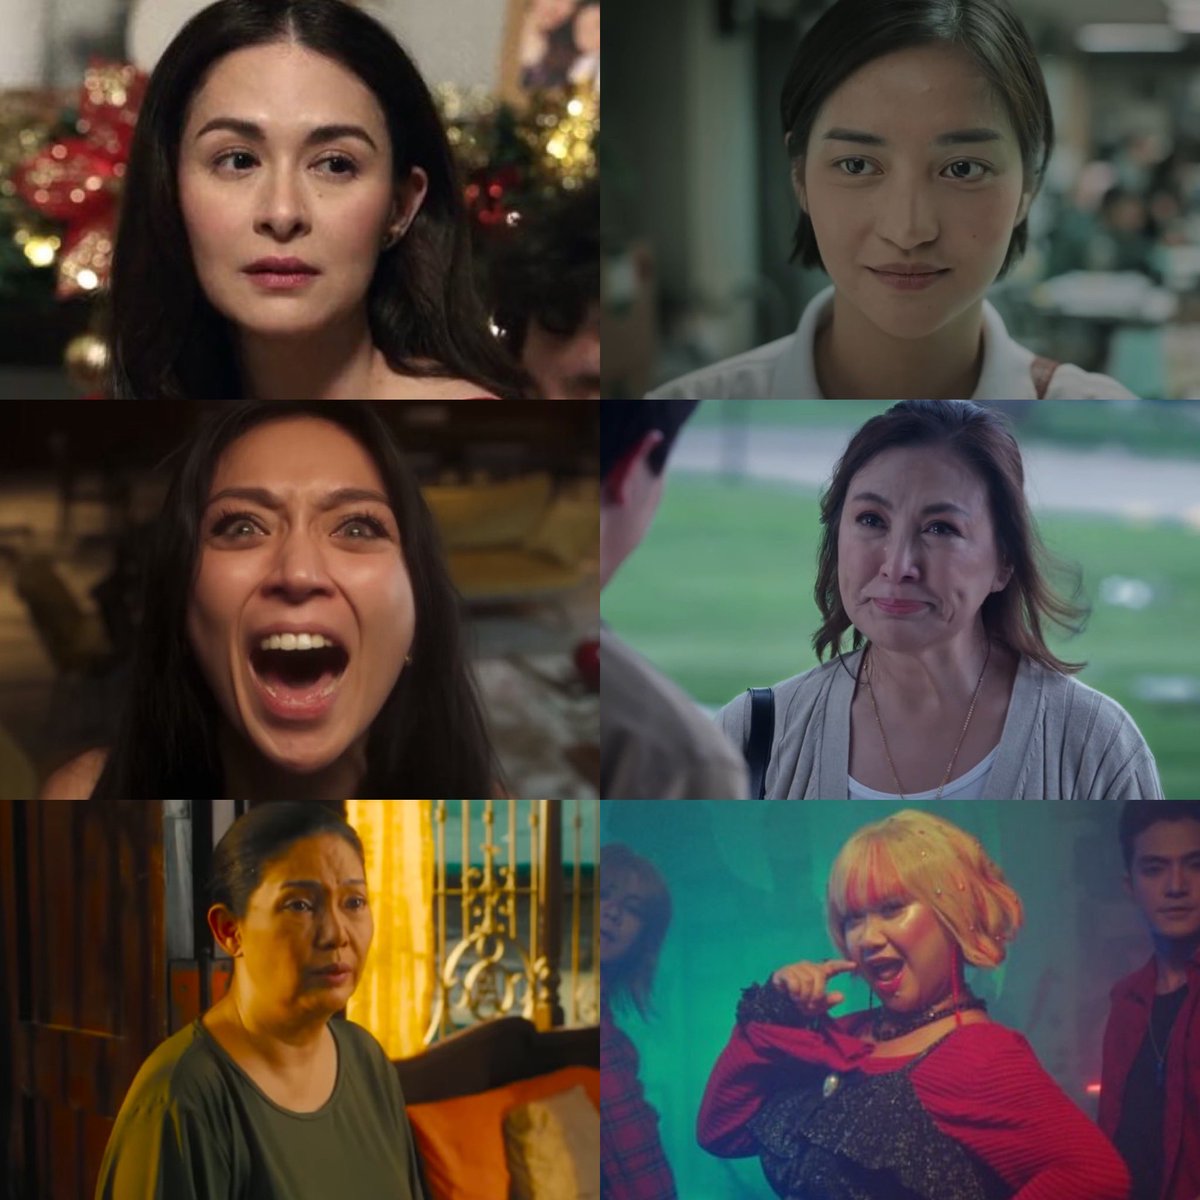 FAMAS Awards 2024 Best Actress • Kathryn Bernardo, ‘A Very Good Girl’ • Eugene Domingo, ‘Becky and Badette’ • Sharon Cuneta, ‘Family of Two’ • Maricel Soriano, ‘In His Mother’s Eyes’ • Marian Rivera, ‘Rewind’ • Charlie Dizon, ‘Third World Romance’